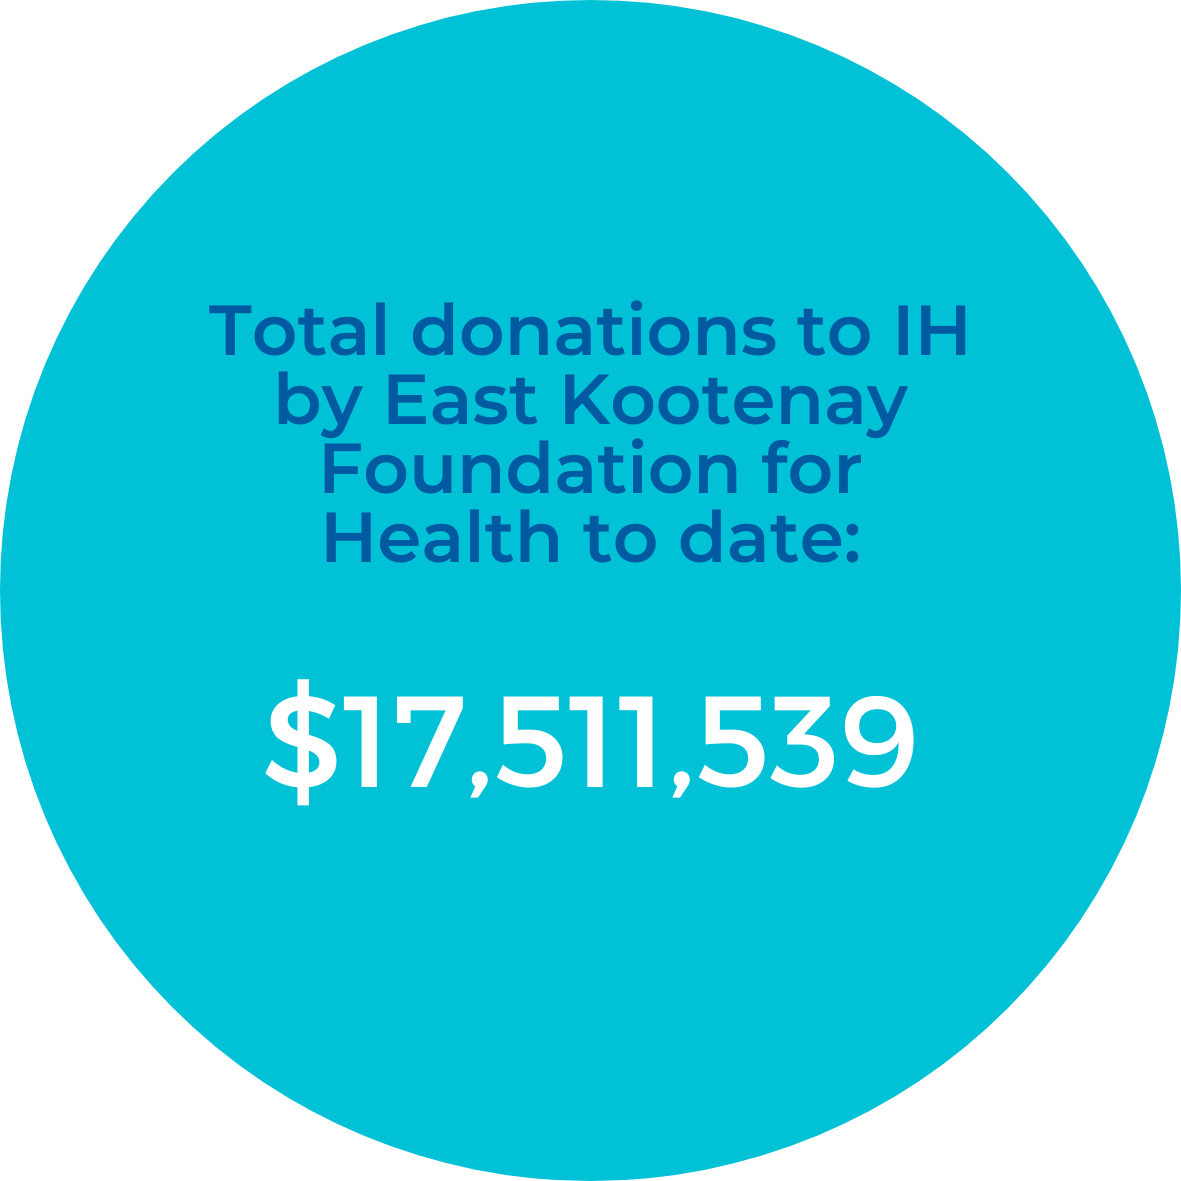 A blue circle with the words total donations to IH by East Kootenay Foundation for Interior Health to date: $17,511,539